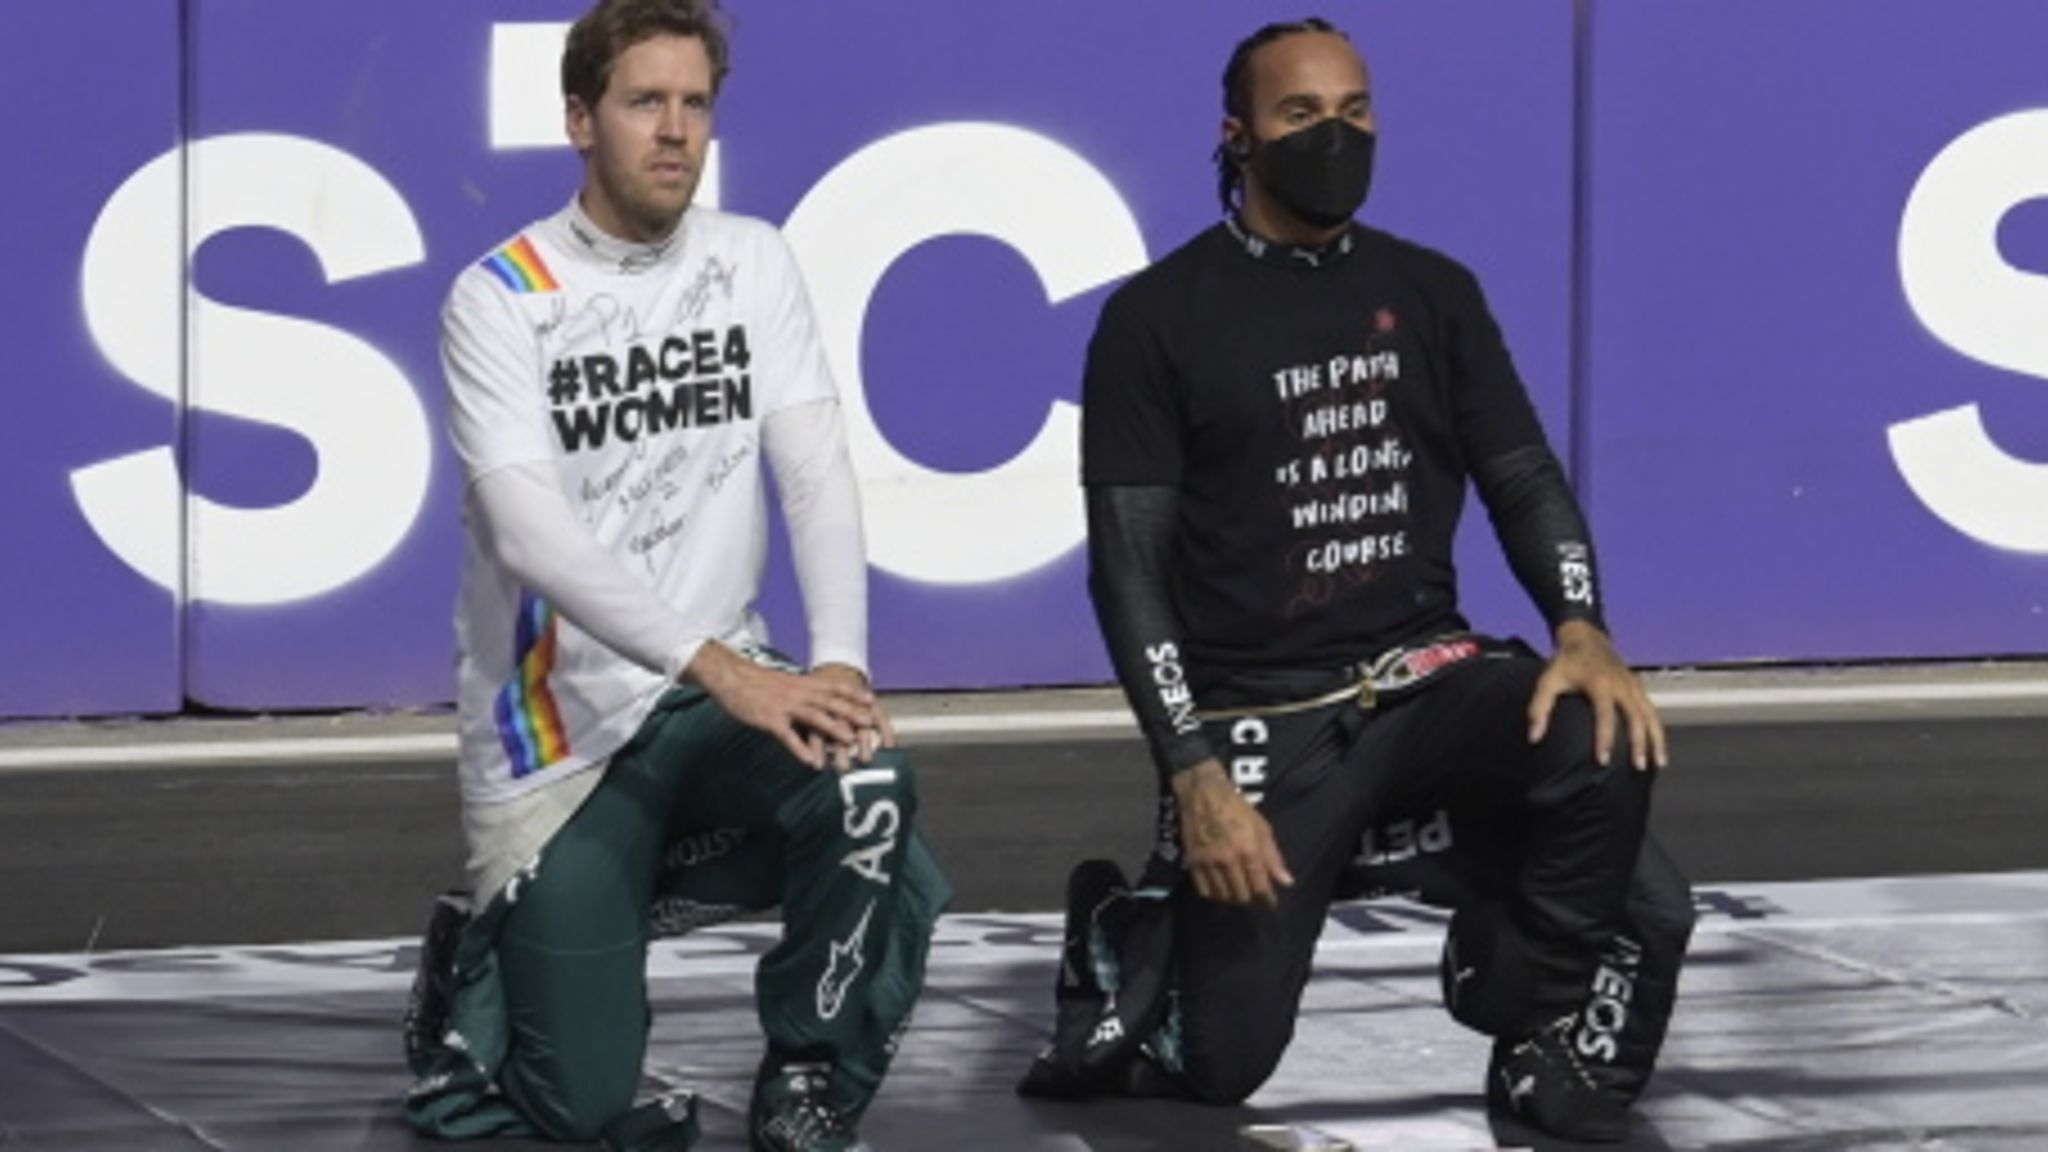 Lewis Hamilton Wears 3 Watches and 8 Rings in Response to FIA